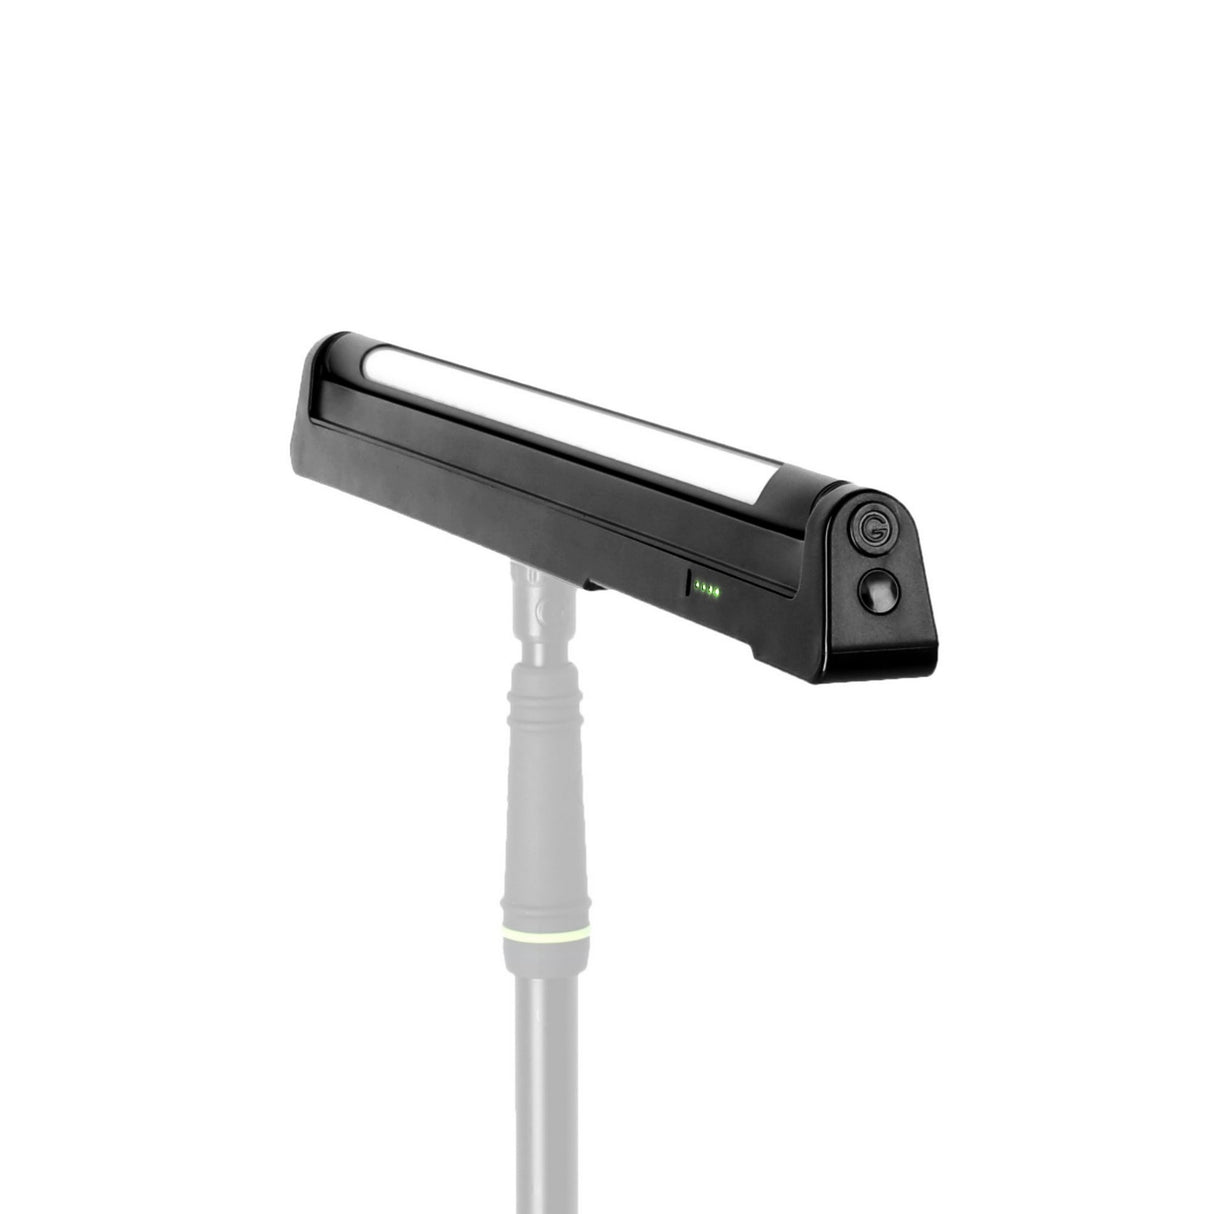 Gravity LED STICK 1 B Compact Magnetic and Dimmable LED Light Bar with USB Charging Port